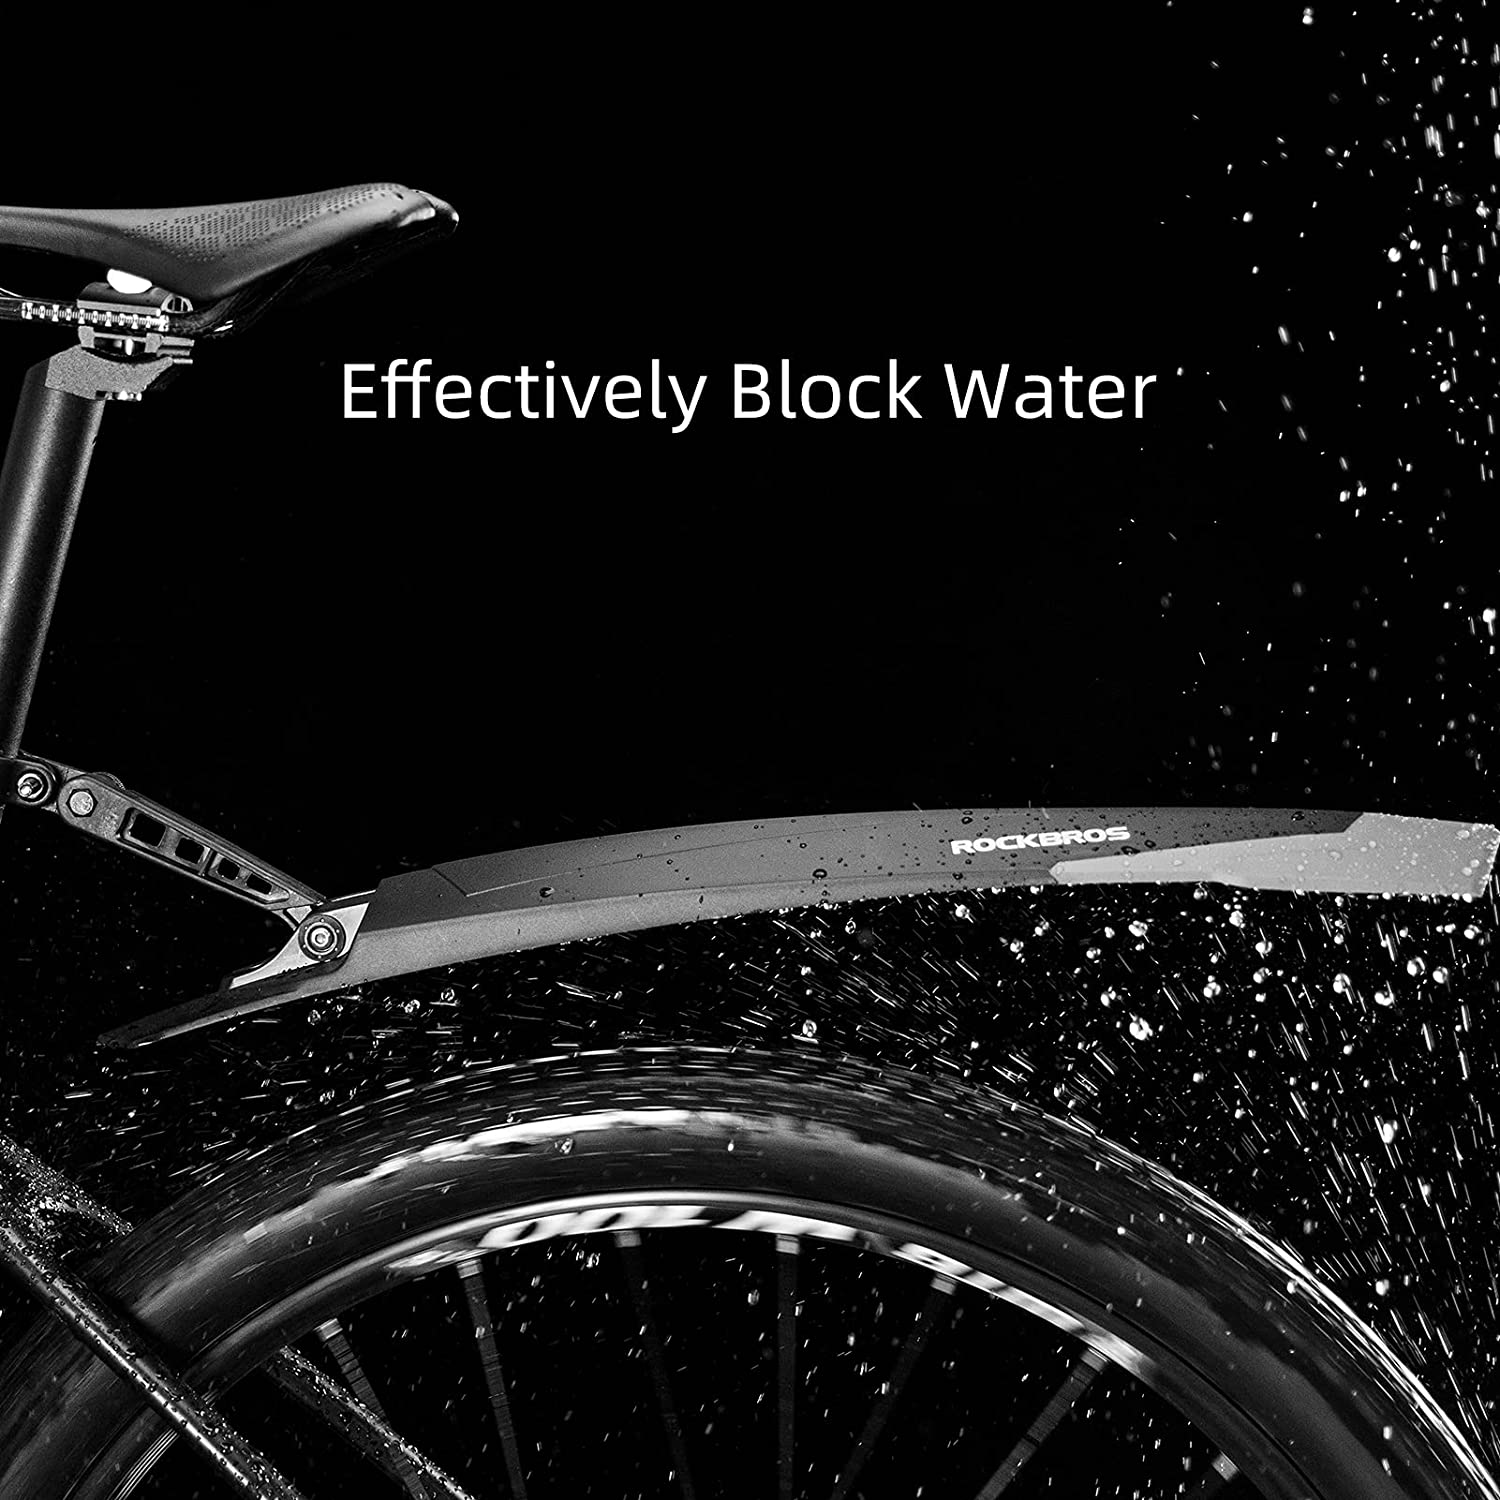 Install a mountain bike rear fender that is wider than your tire so that it blocks the spray of water effectively.